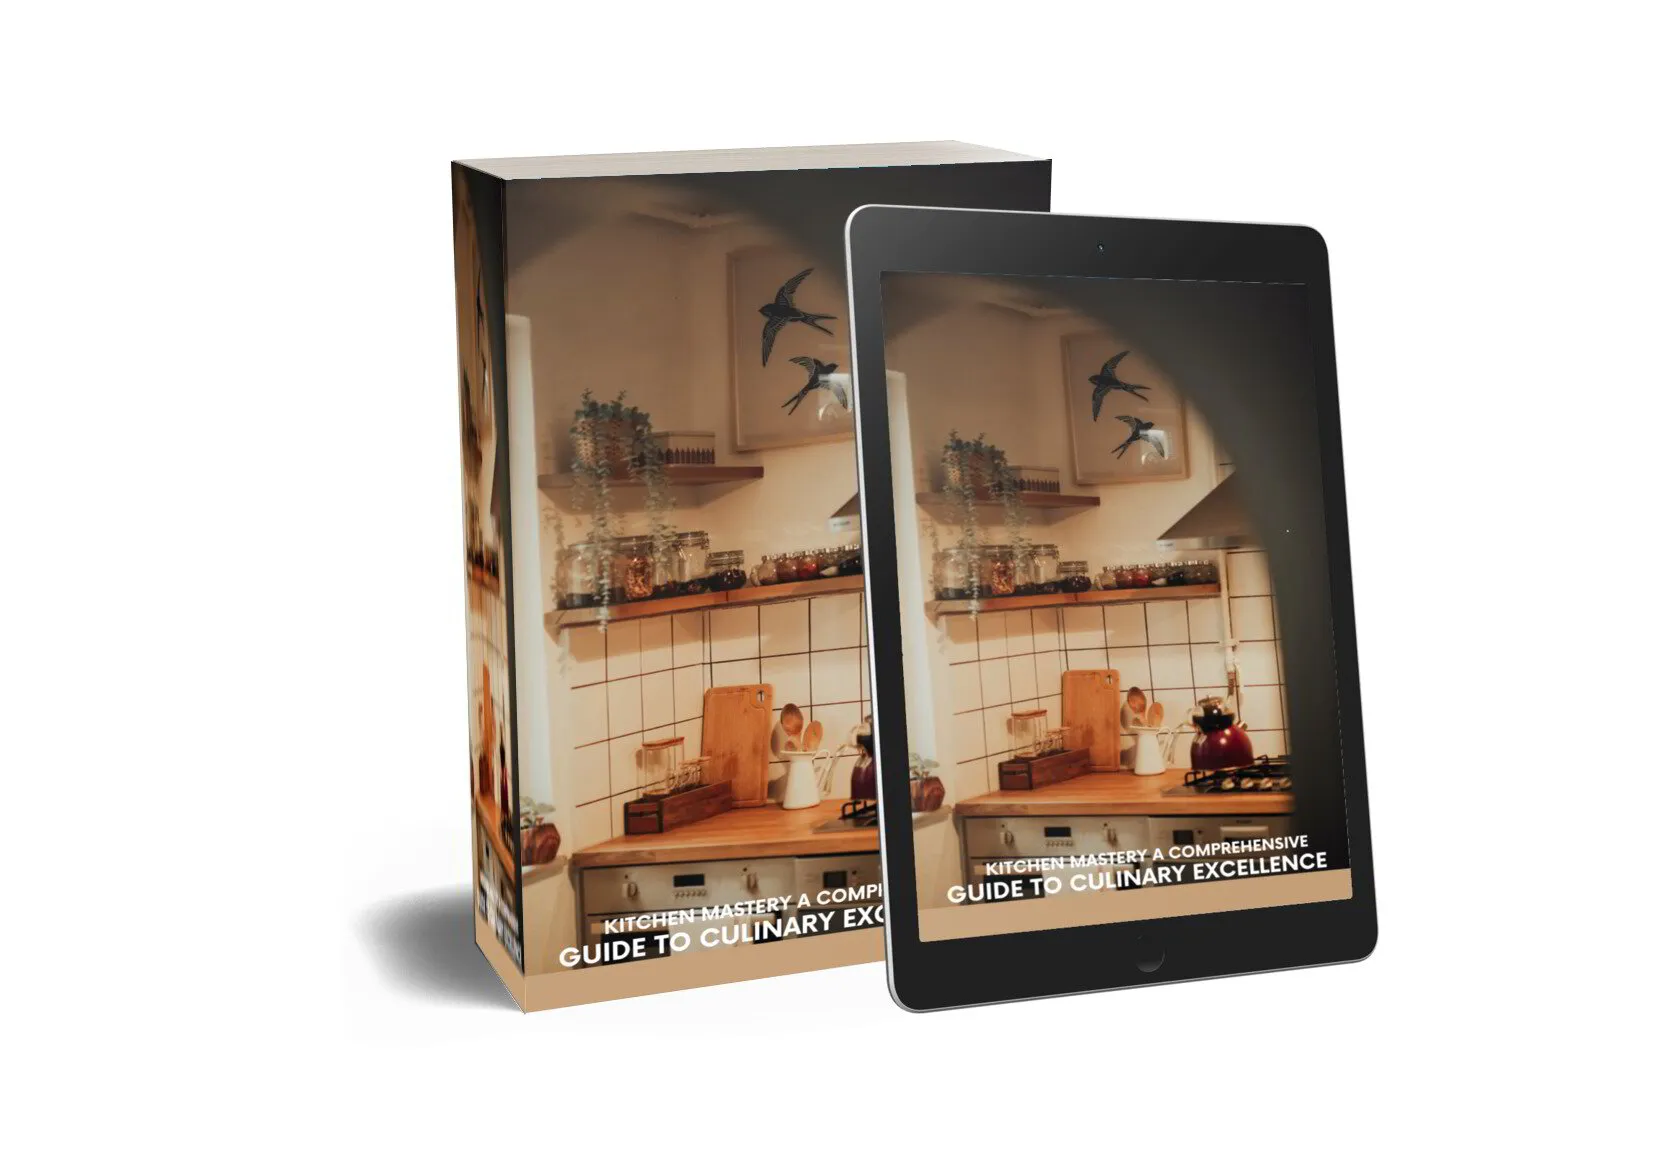 Kitchen Mastery A Comprehensive Guide to Culinary Excellence